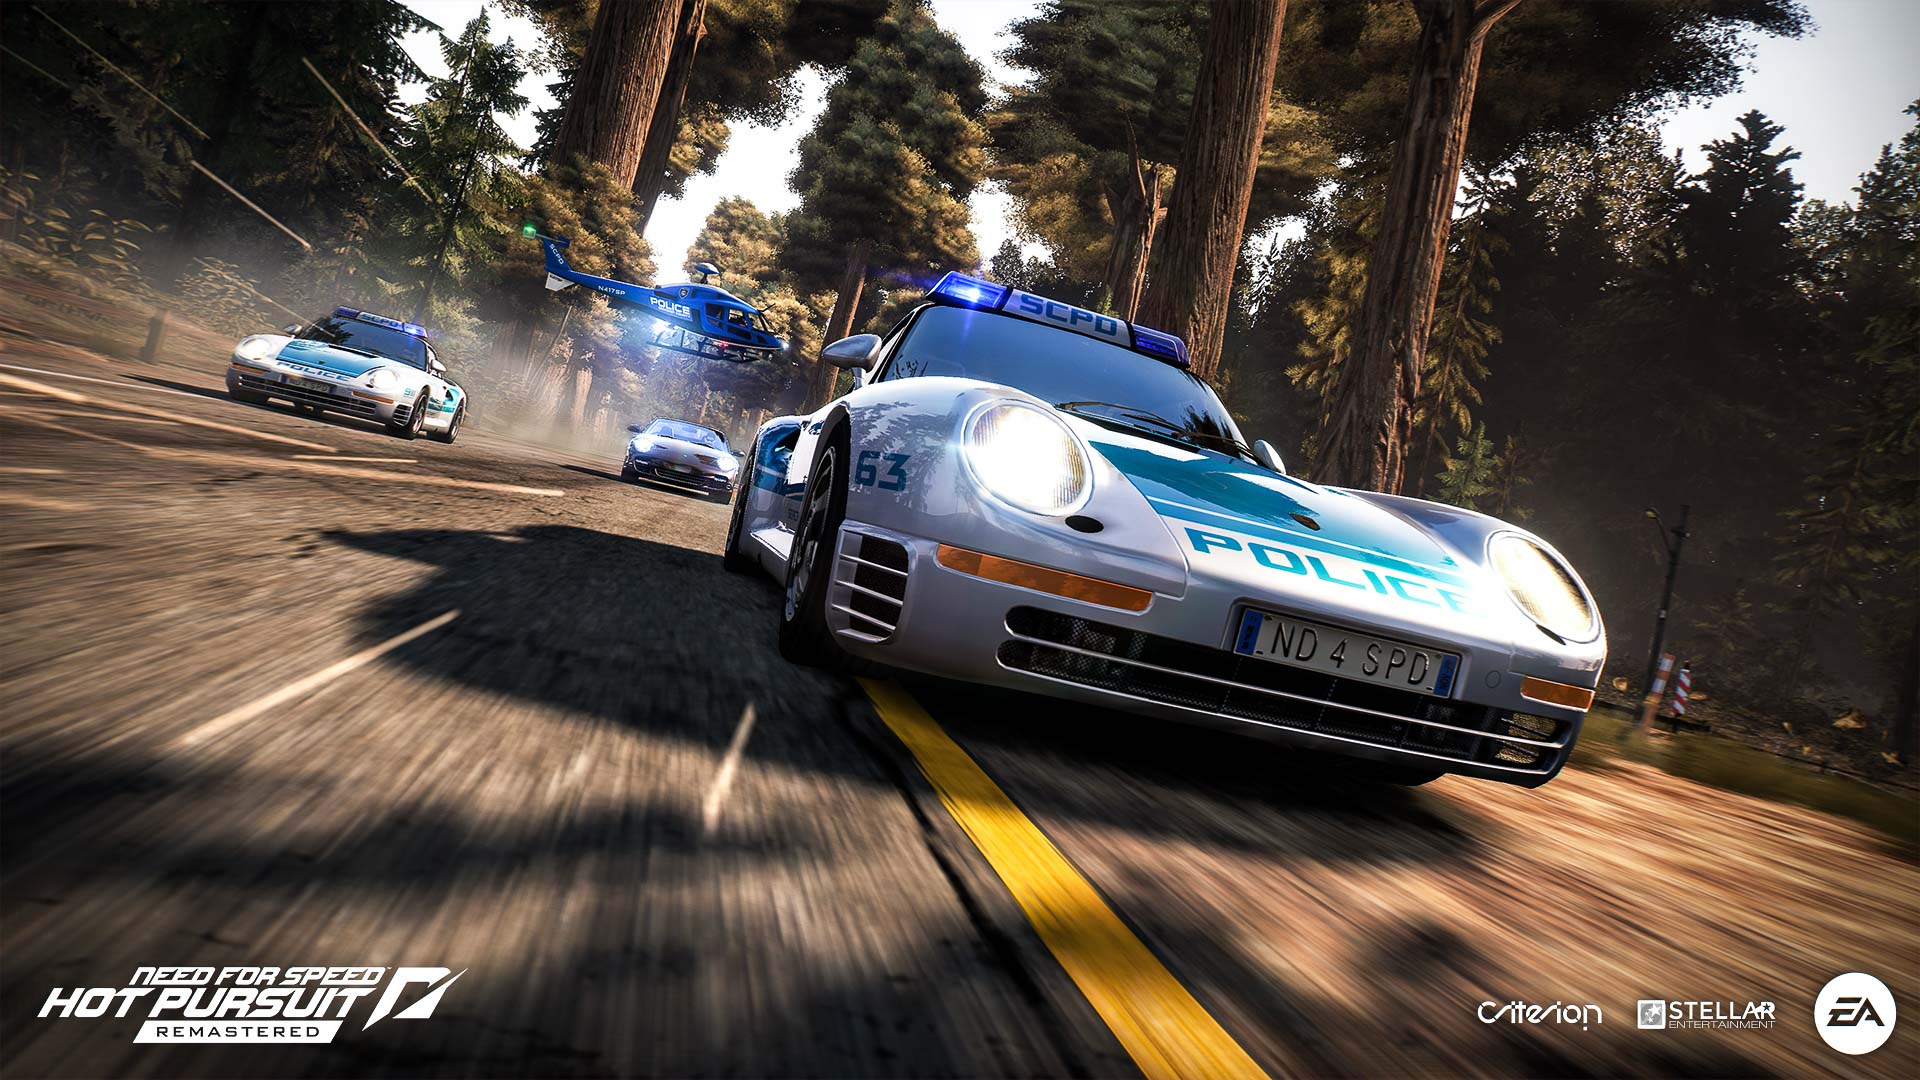 2020 Need for Speed Hot Pursuit Remastered | Fanaticar Magazin